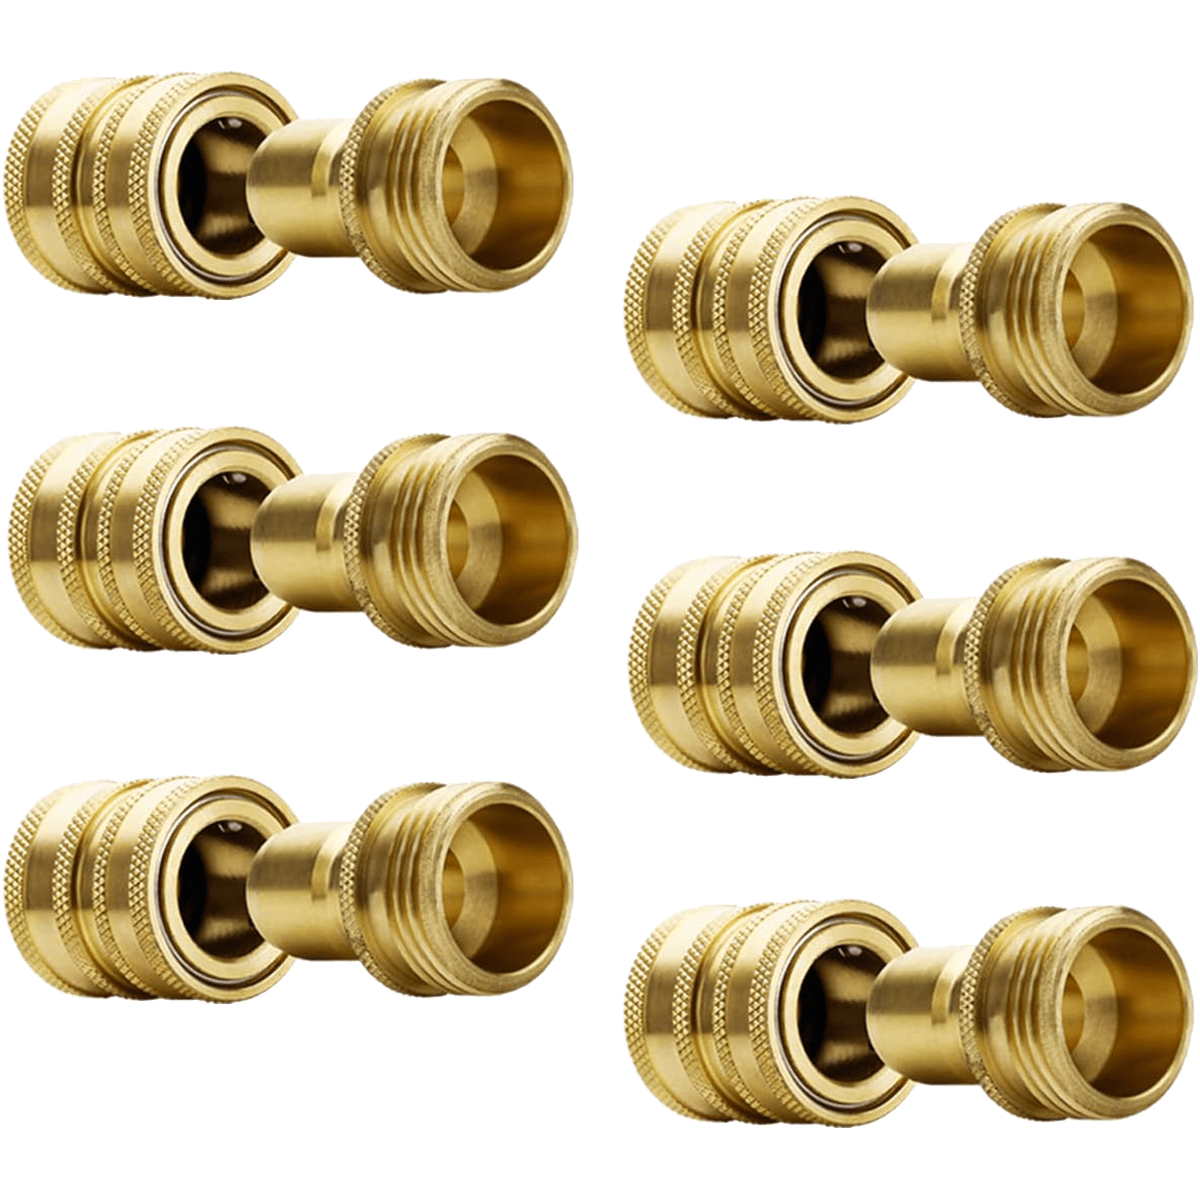 Solid Brass Garden Hose Quick Connect Set, 3/4 Inch GHT Solid Brass (6 Sets)